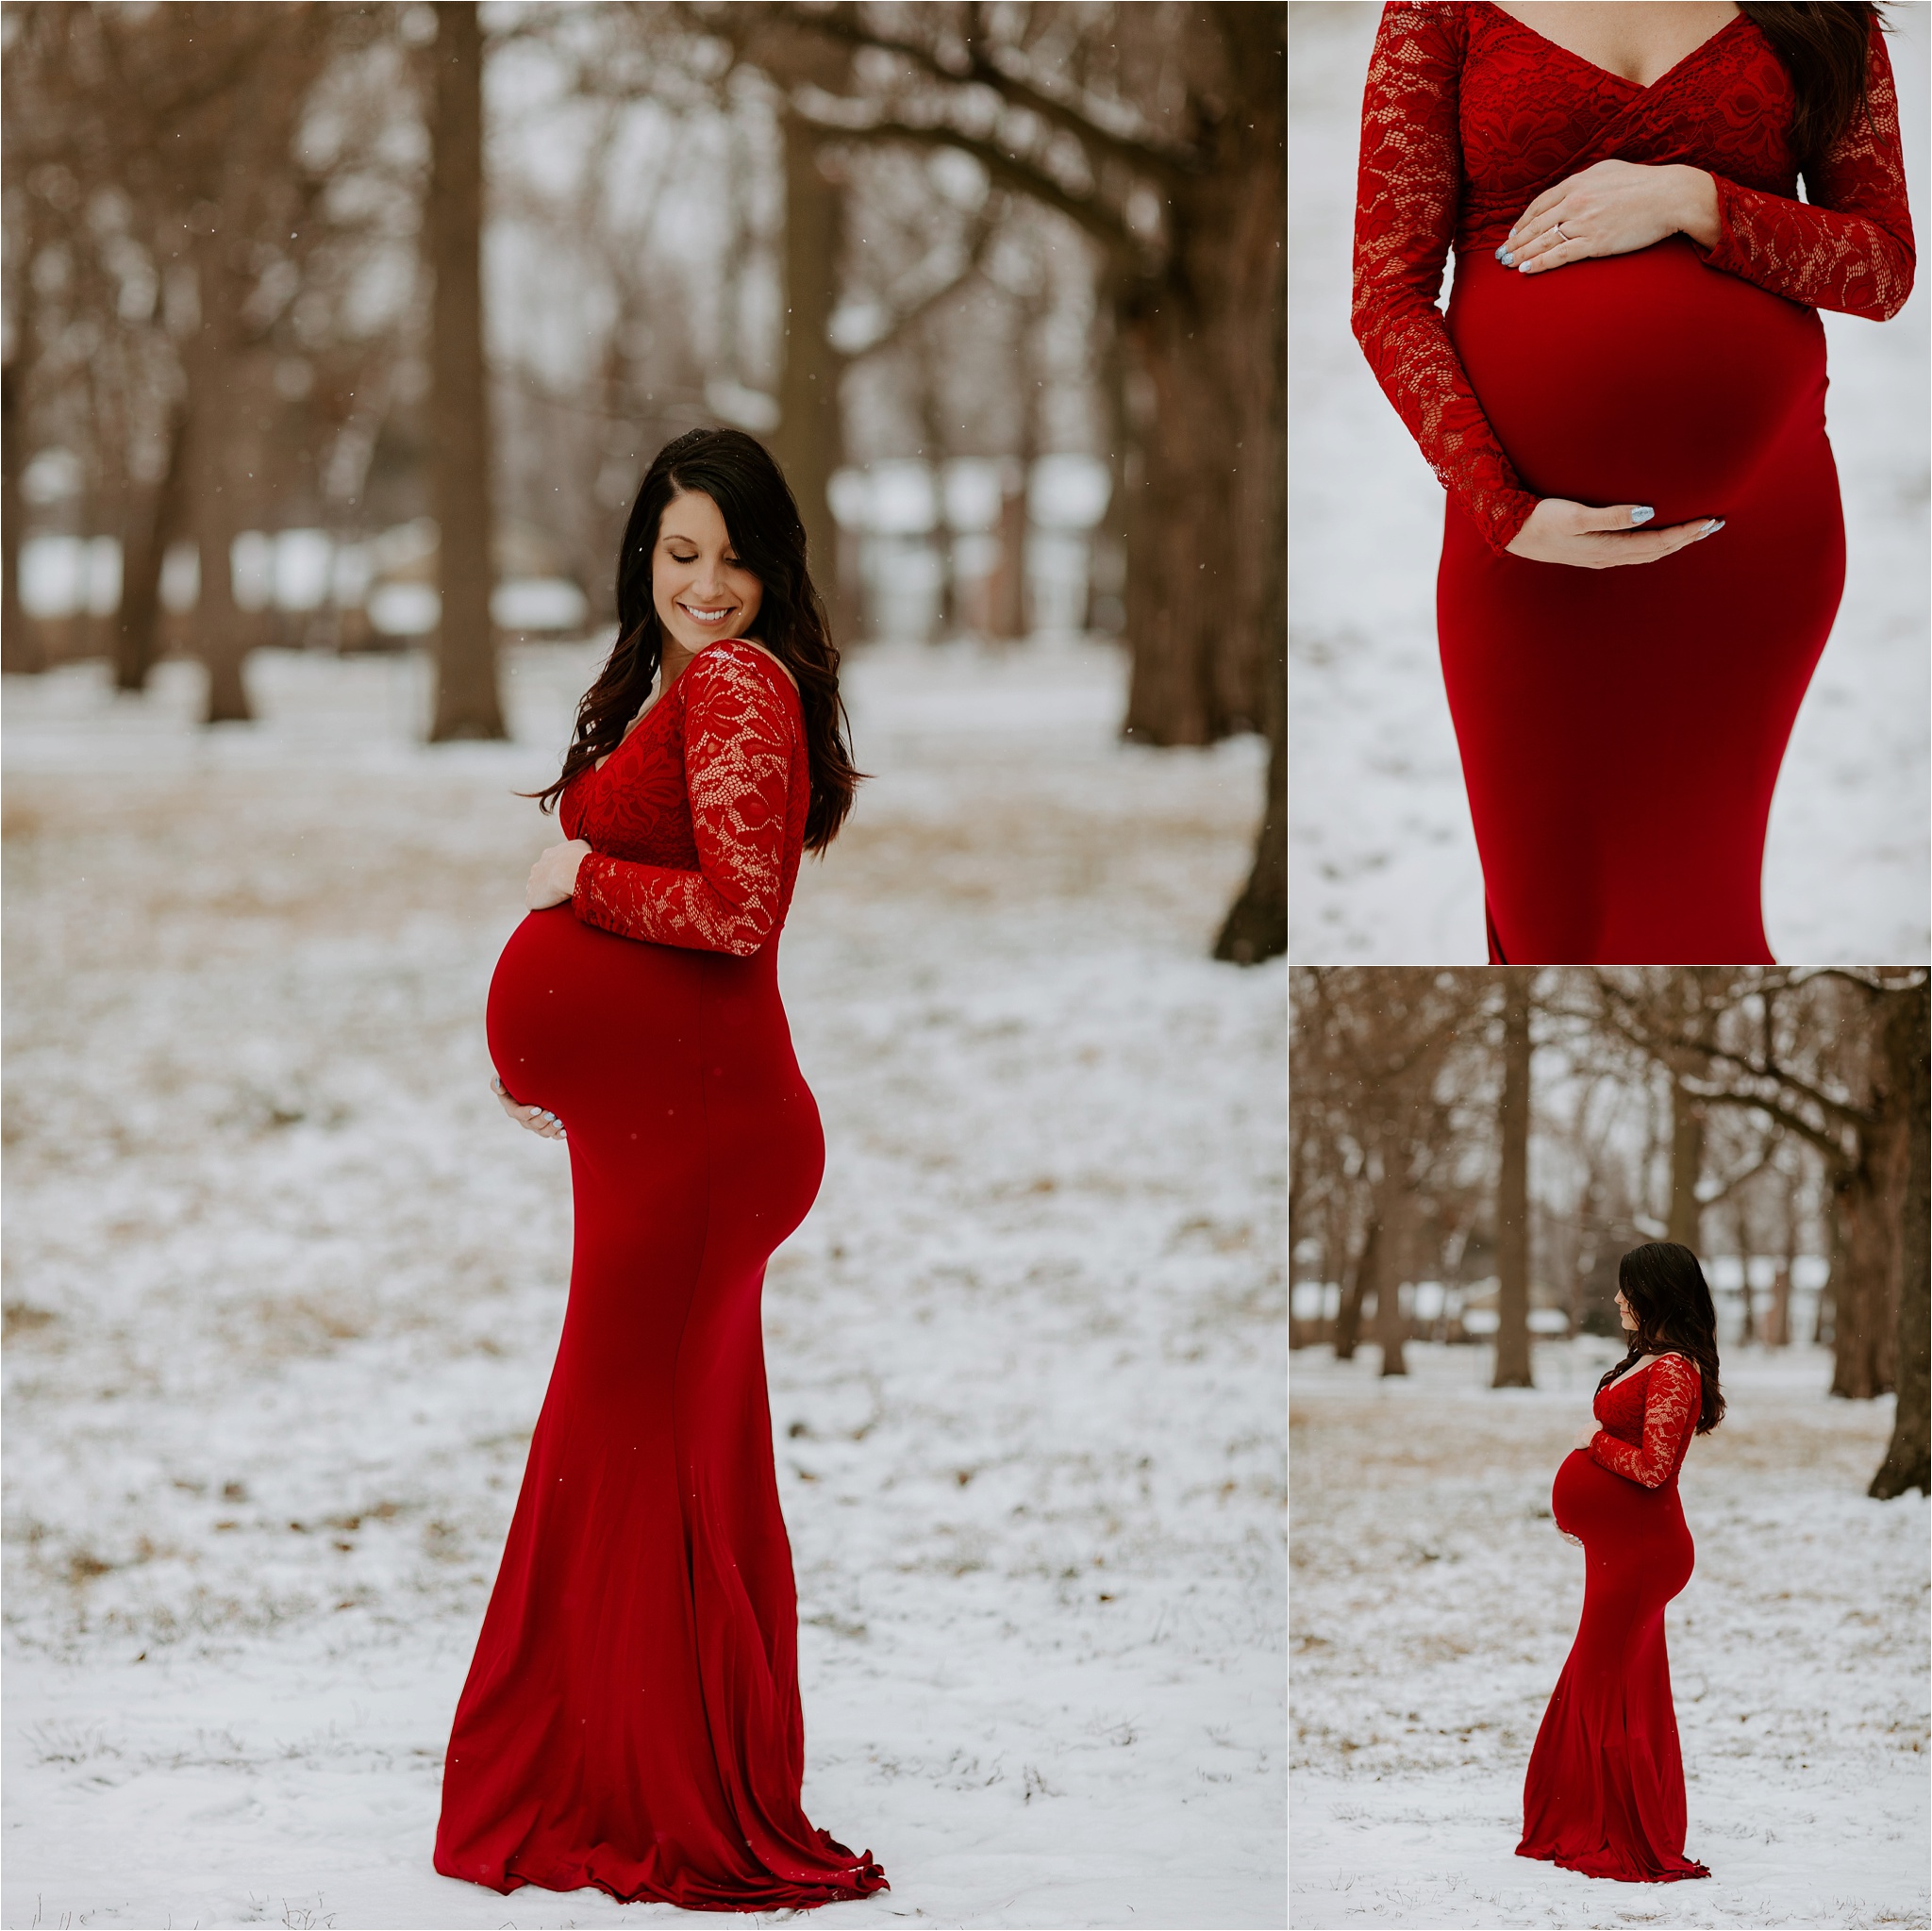 Red dress winter maternity session. Chicago Portrait Photographer